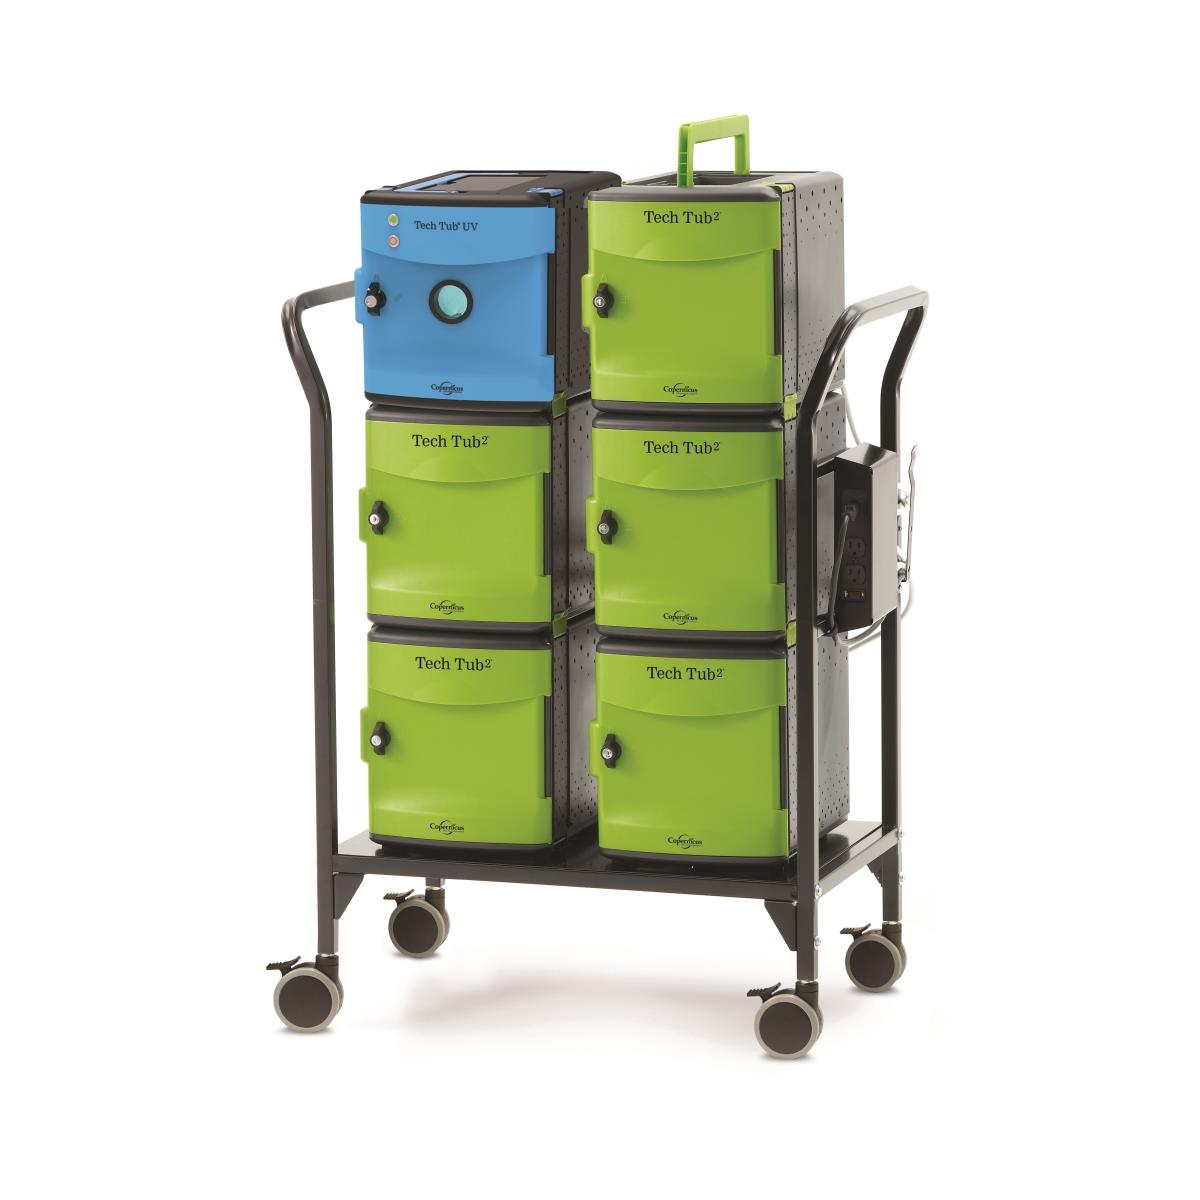 Picture of Copernicus FTT726-USB-UV Tech Tub2 Modular Cart with UV Tub USB - Charges & Syncs 26 iPads